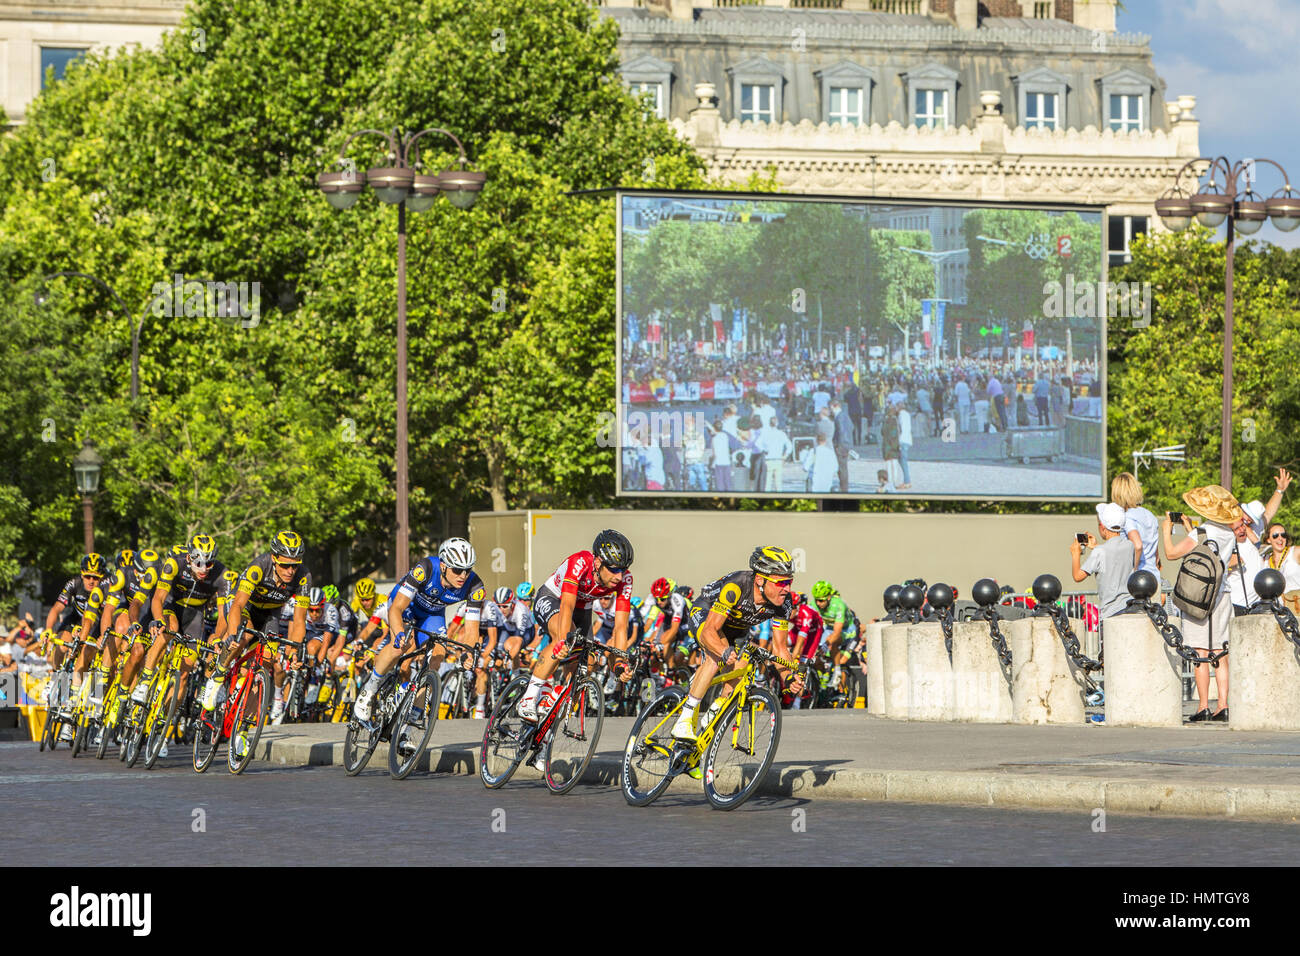 Paris, France - July 24, 2016: Thomas Voeckler of Direct Energie Team and Thomas De Gendt of Lotto-Soudal Team in fornt of the peloton passing by the  Stock Photo